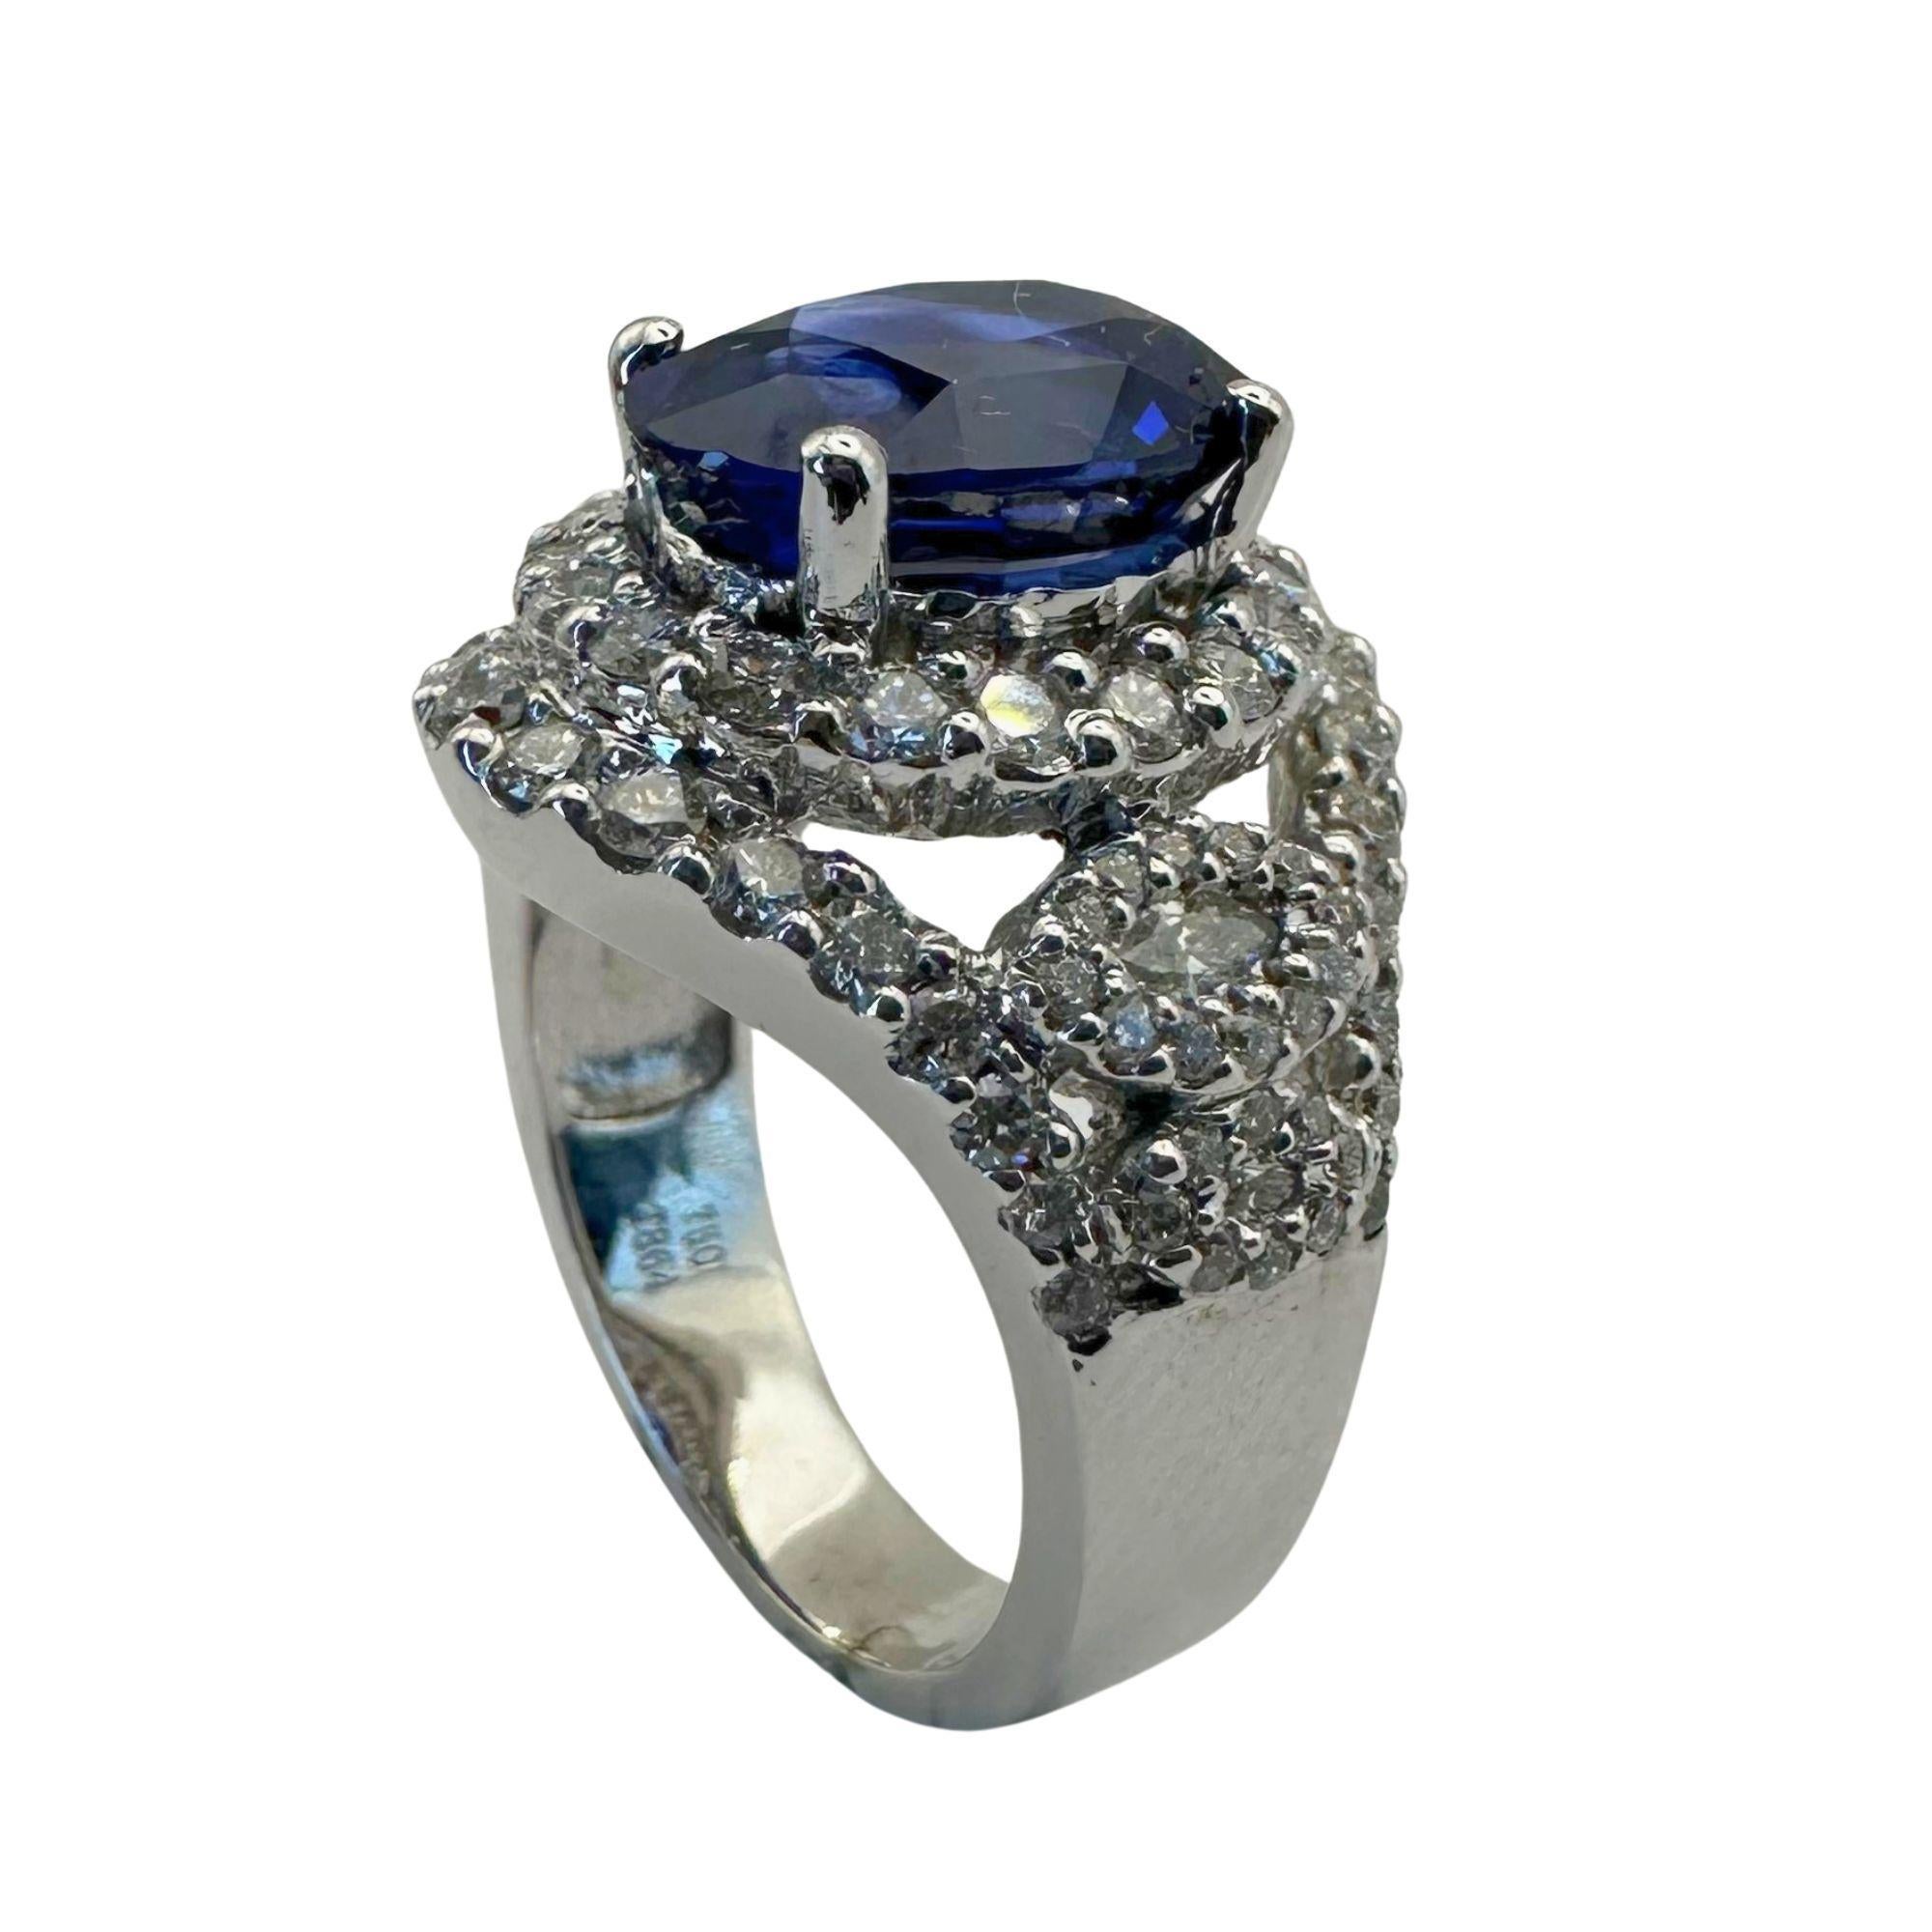 Indulge in luxury with our 18k Diamond and Sapphire Ring. Crafted from 18k white gold, this exquisite piece features a stunning 4.43 carat sapphire at its center, encircled by 1.34 carats of glittering diamonds. With a weight of 12.33 grams and a